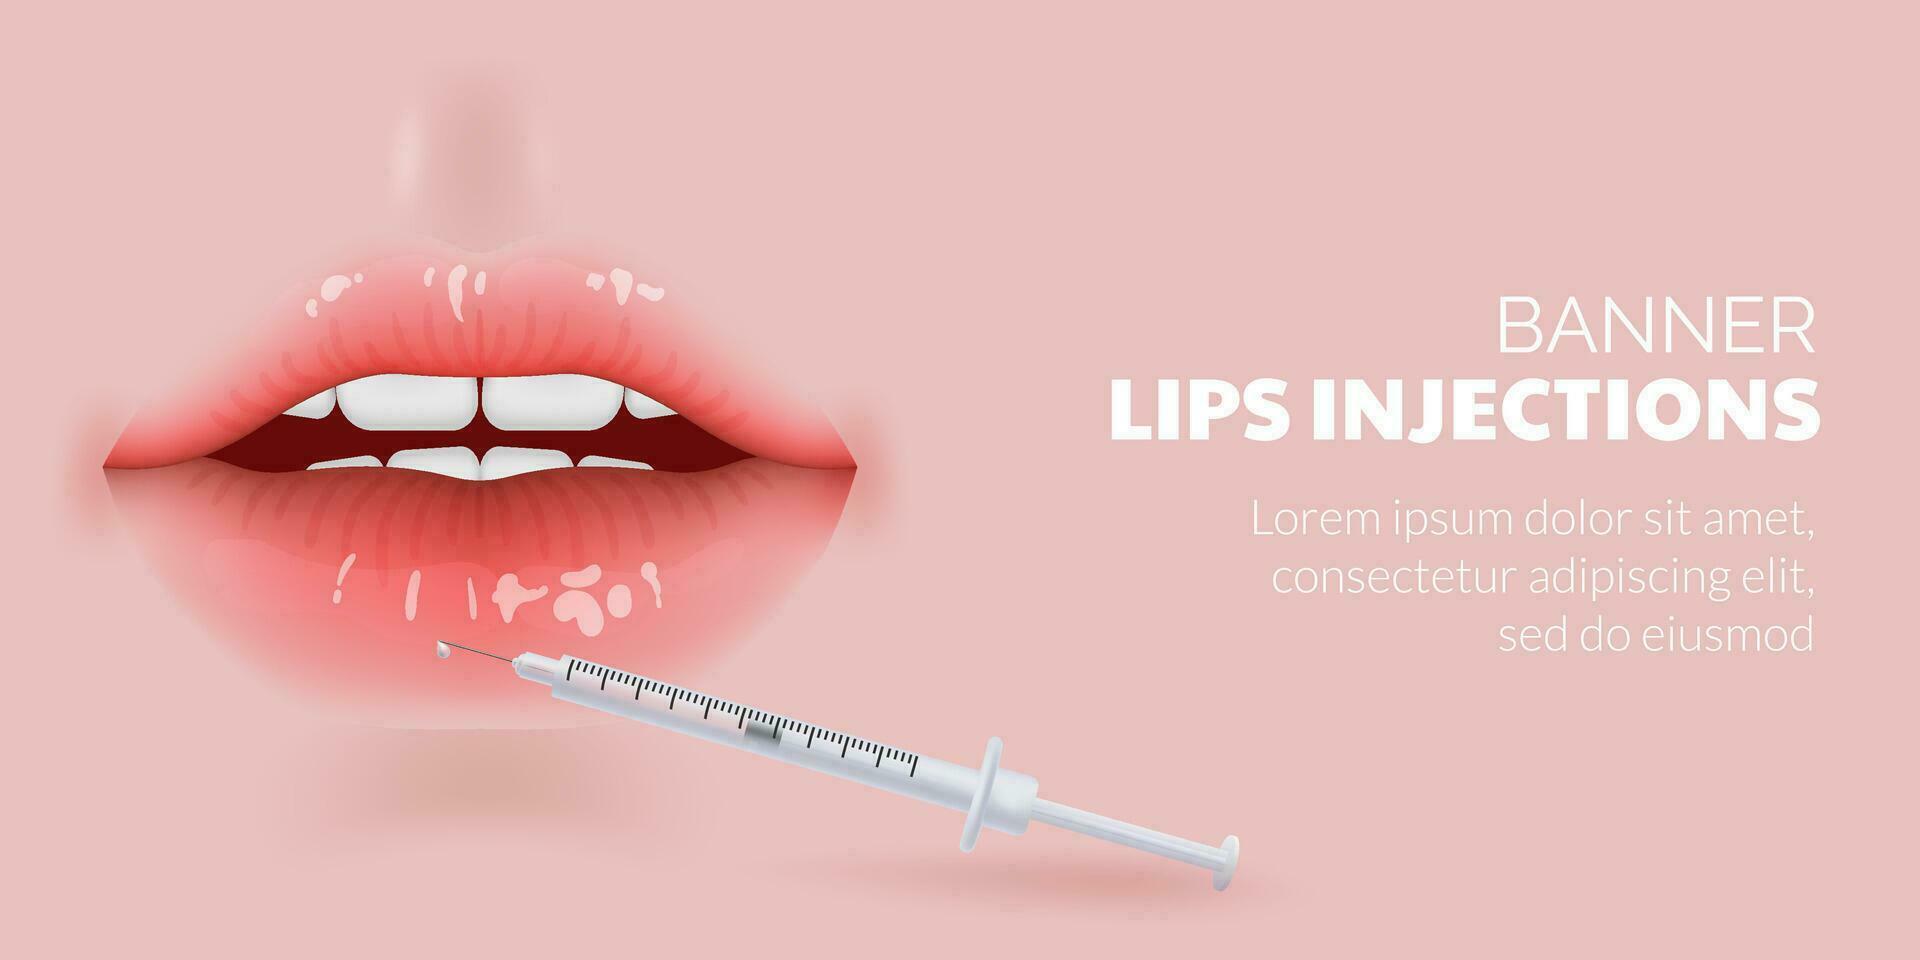 3D illustration of realistic lips undergoing a cosmetic procedure for aging care. Results of lip injections and wrinkle reduction, the correction and contouring of lips using fillers injection. vector